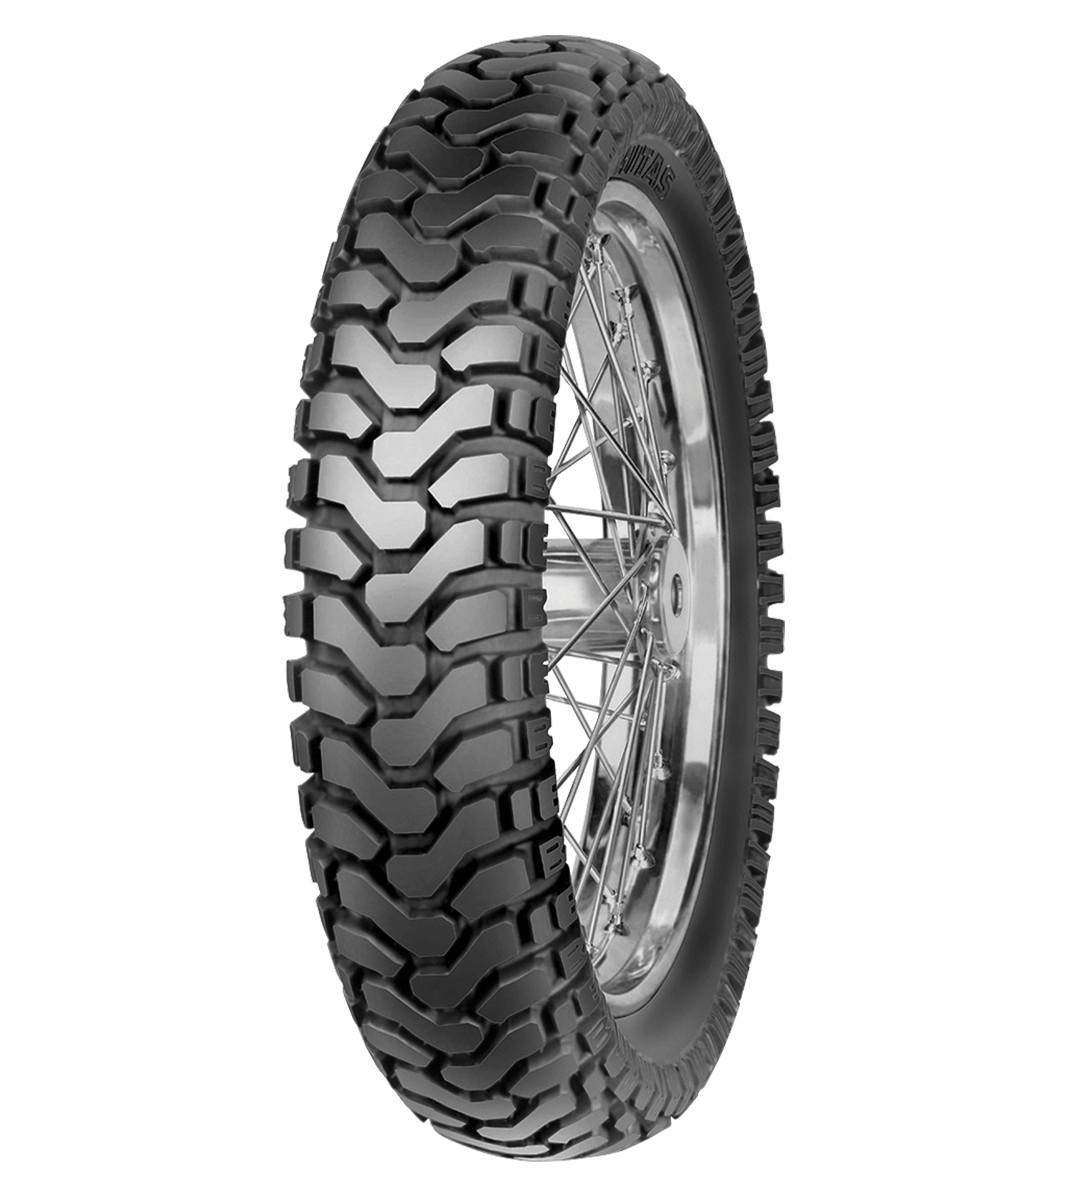 Mitas E-07 ENDURO 150/70-17 Trail OFF Trail 69T No Stripe Tubeless Rear Tire, 224049, 150/70-17, Adventure Touring, E Series, E-07 Enduro, Rear, Trail, Trail OFF, Tires - Imported and distributed in North &amp; South America by Lindeco Genuine Powersports - Premier Powersports Equipment and Accessories for Motorcycle Enthusiasts, Professional Riders and Dealers.